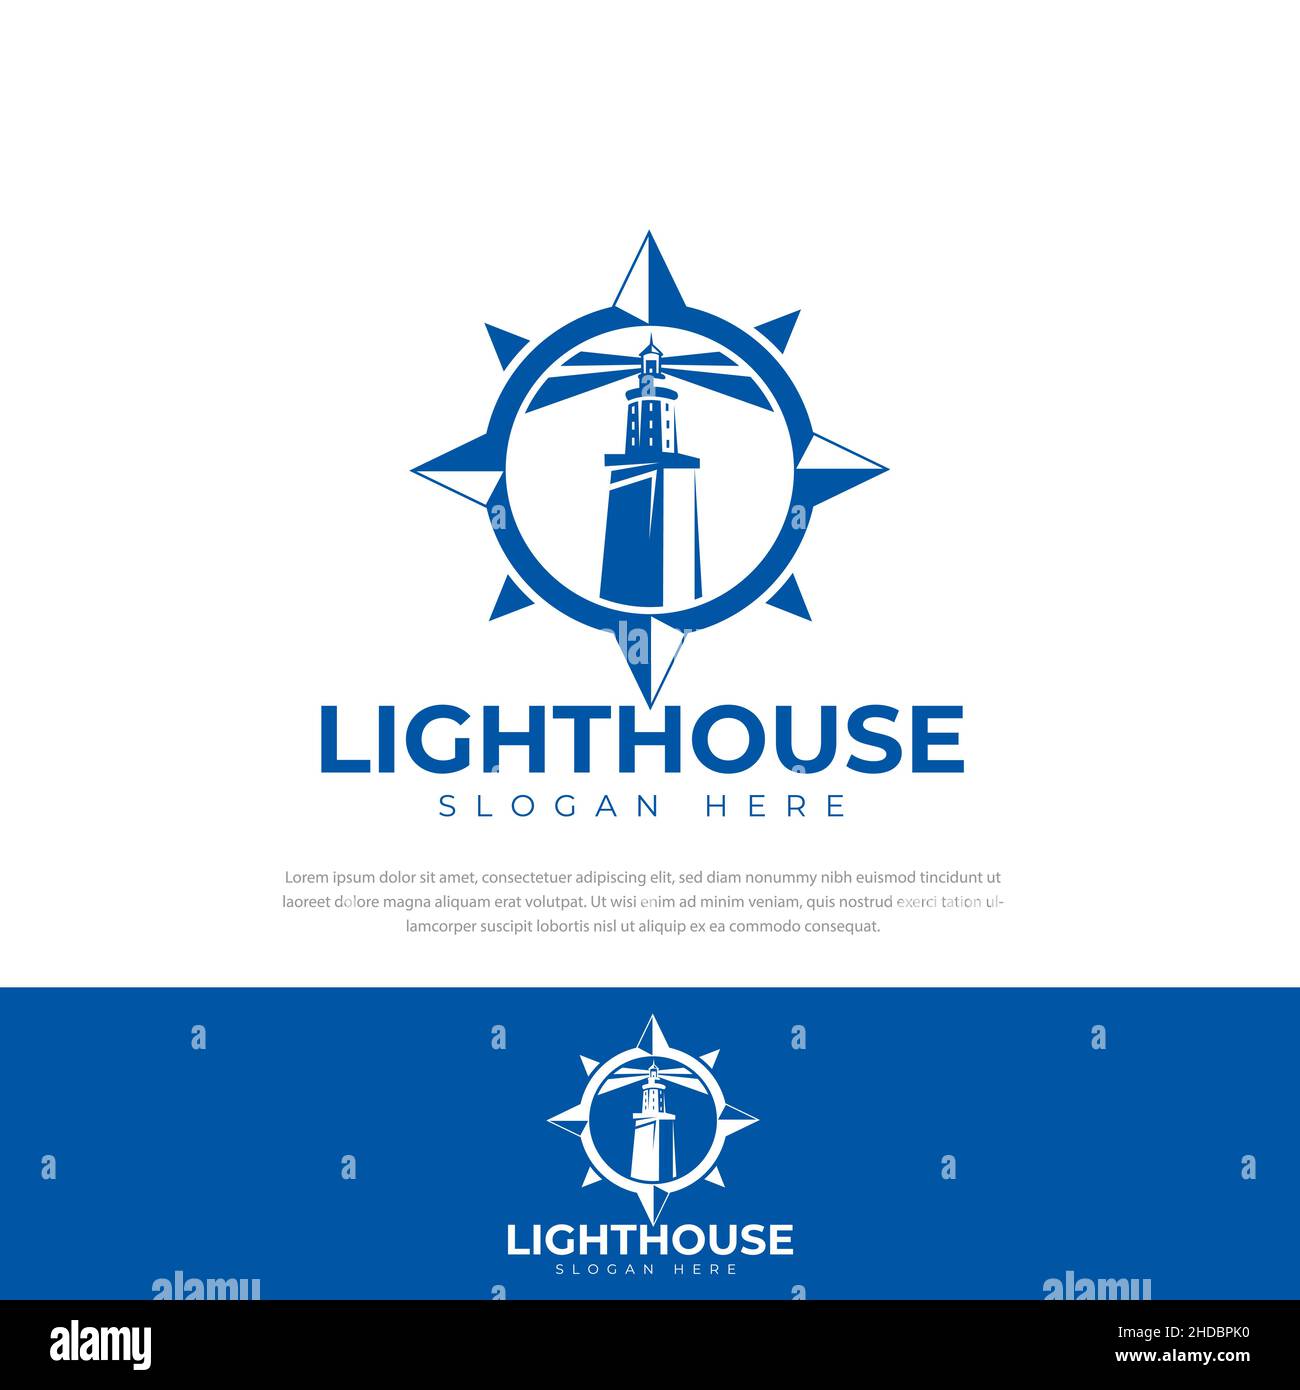 Lighthouse Logo Design With Compass Design Illustration Vector logo, symbol, icon, app, can be used for your business Stock Vector